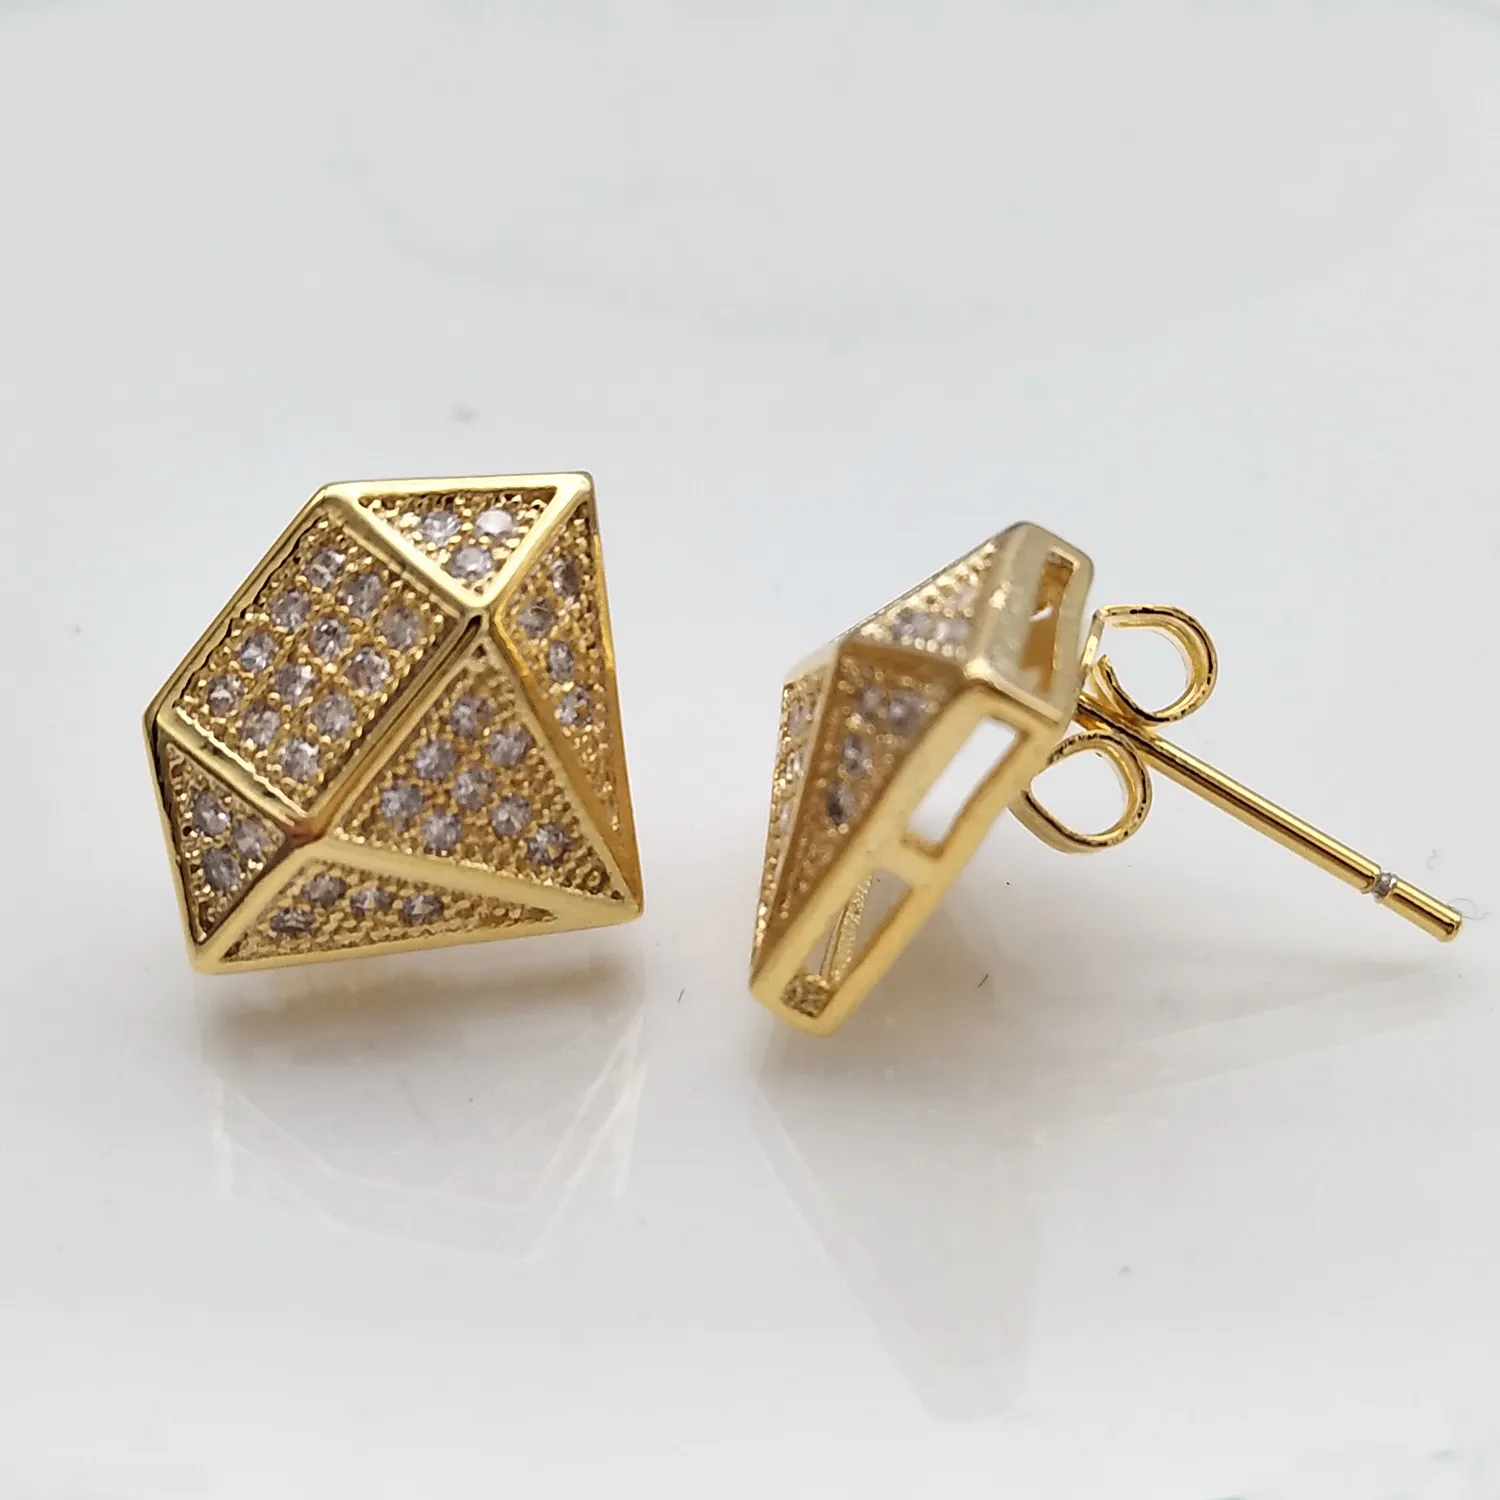 New Fashion 18K Gold and White Gold Princess Cut Diamond Mens Earring Studs personalized Hip Hop CZ Cubic Zirconia Stud Earrings Jewelry